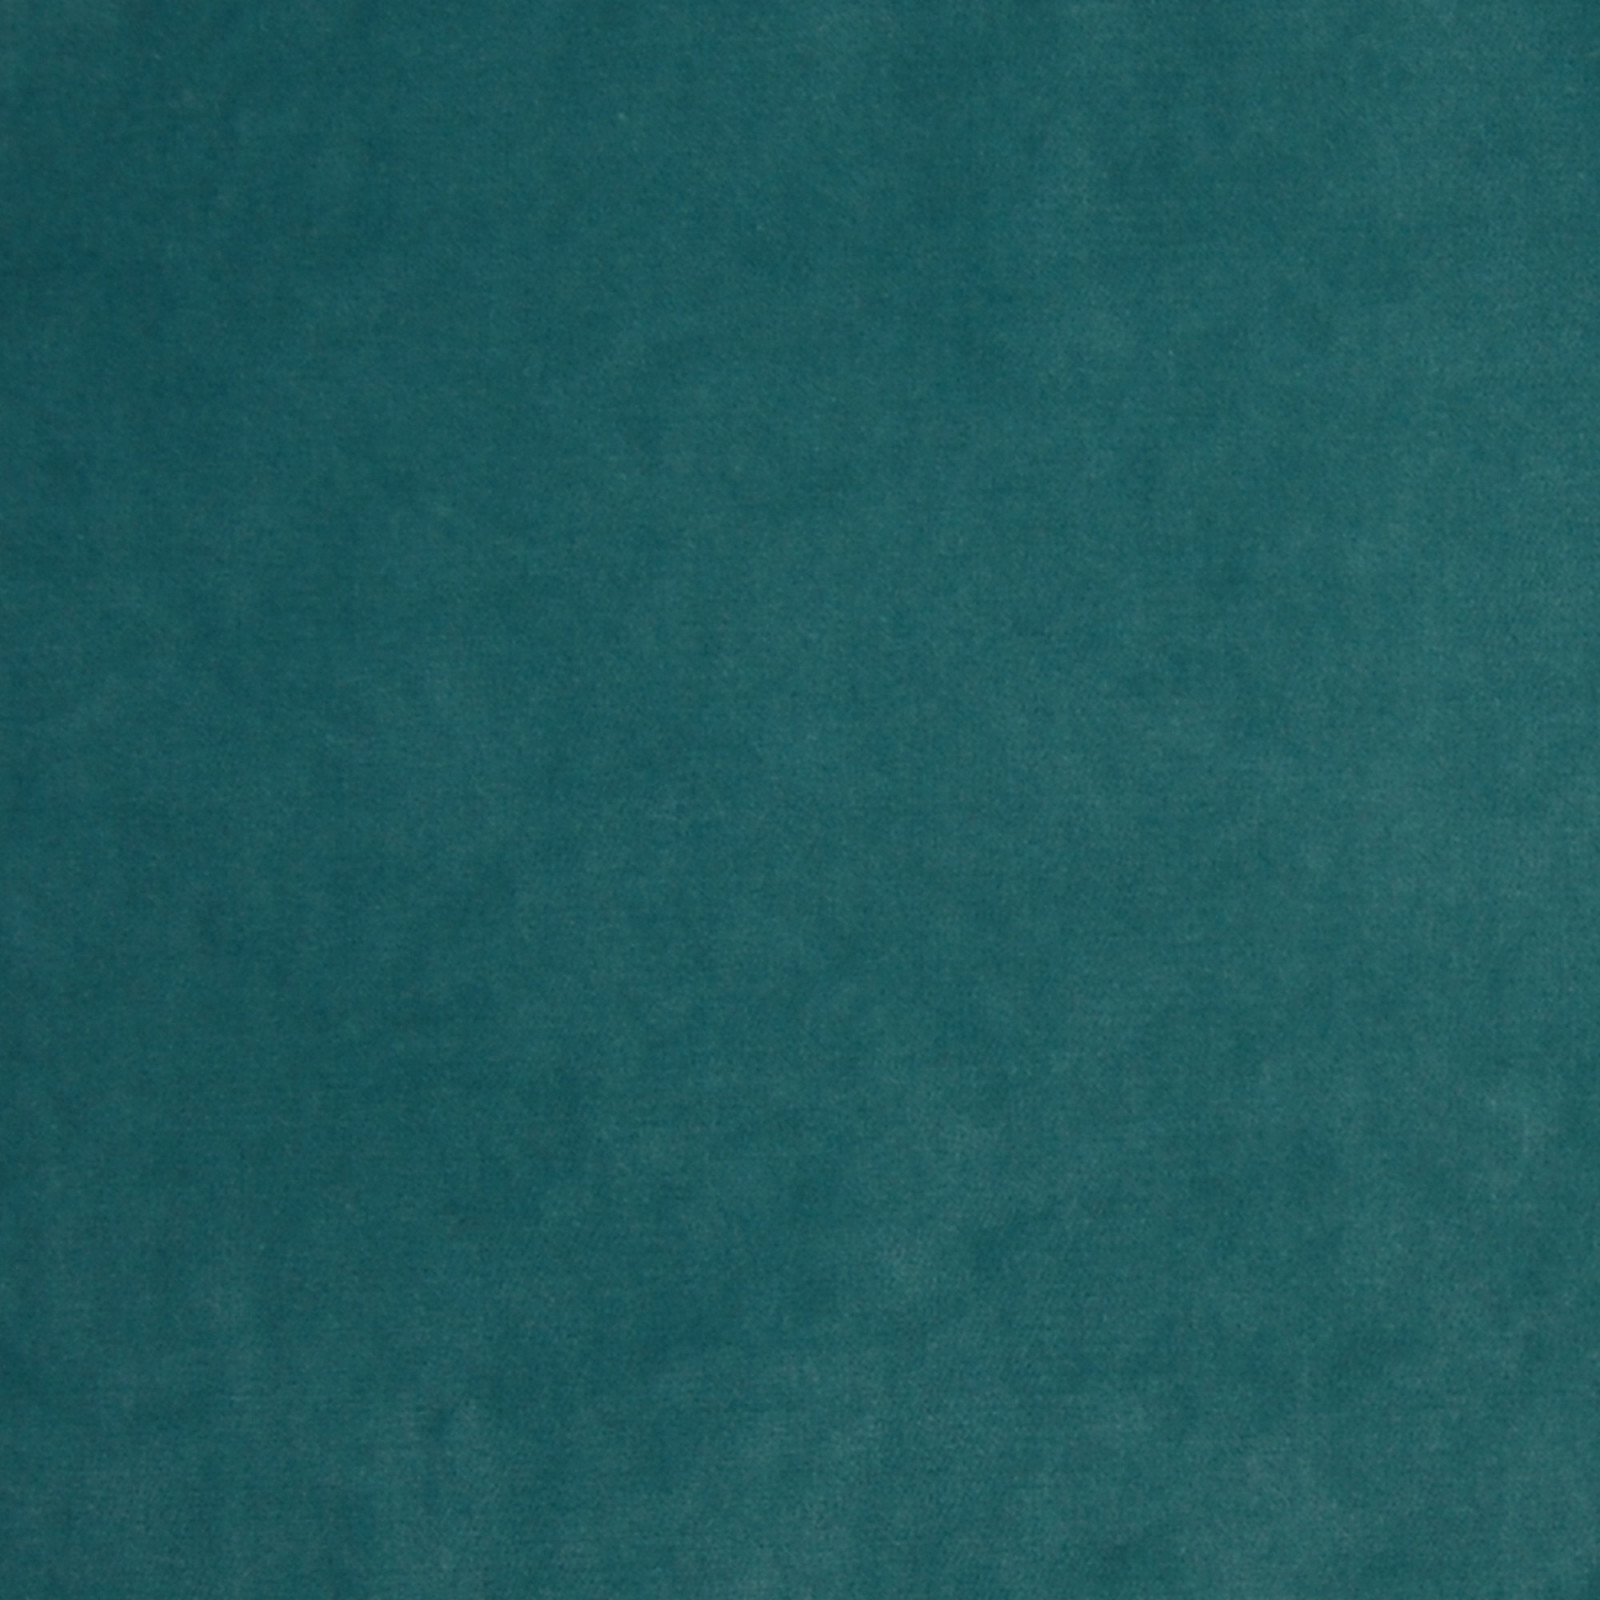 Teal Blue and Teal Solid Velvet Upholstery Fabric